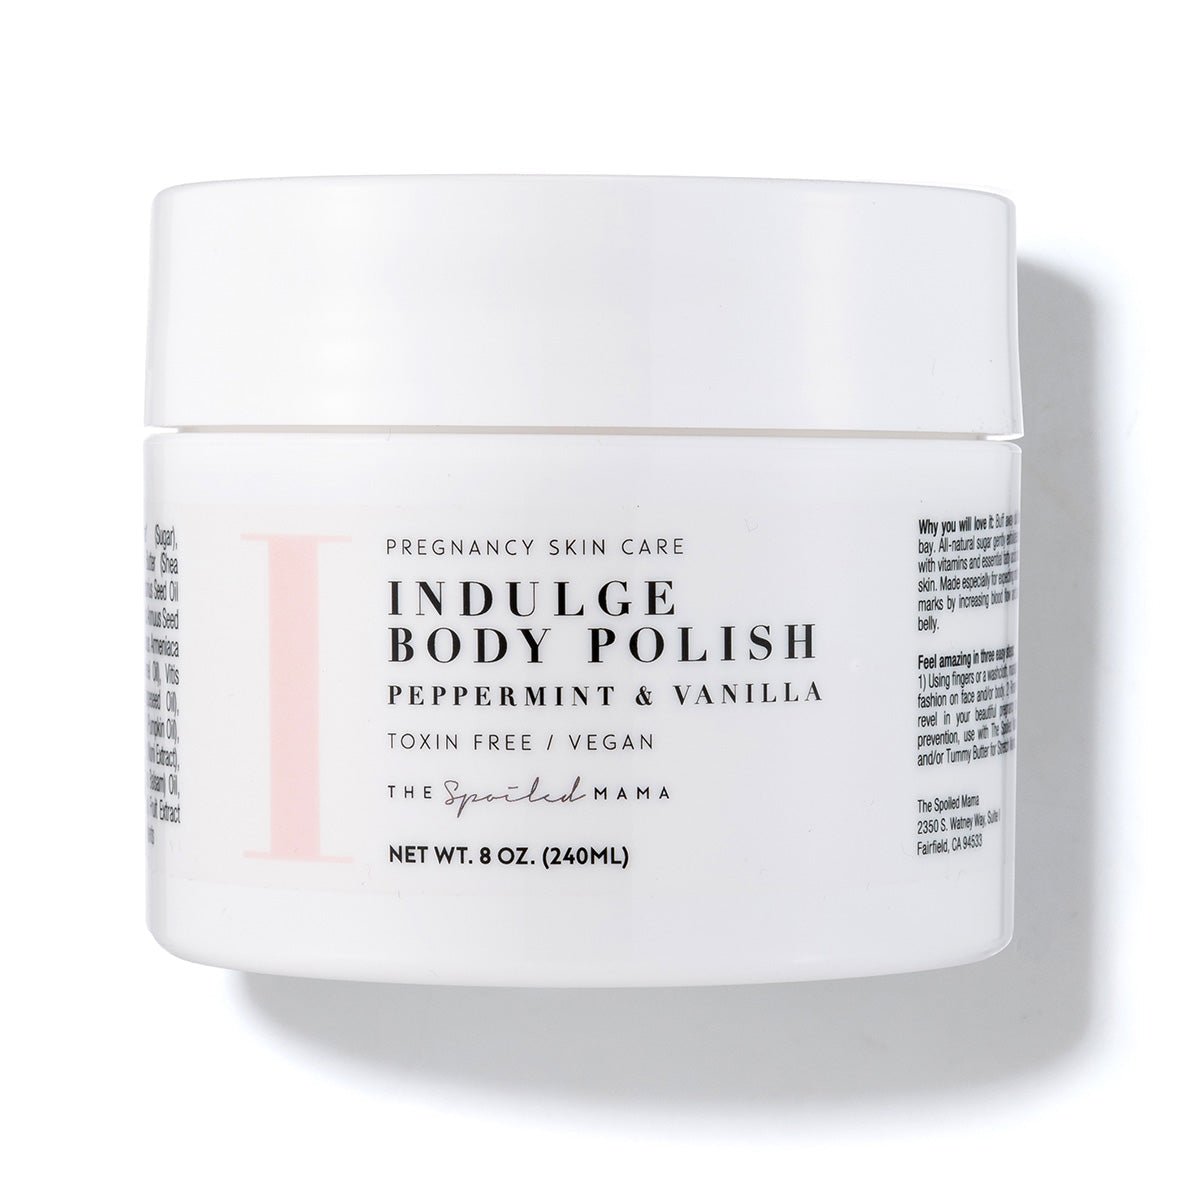 Indulge Peppermint Sugar Scrub for Stretch Marks by The Spoiled Mama